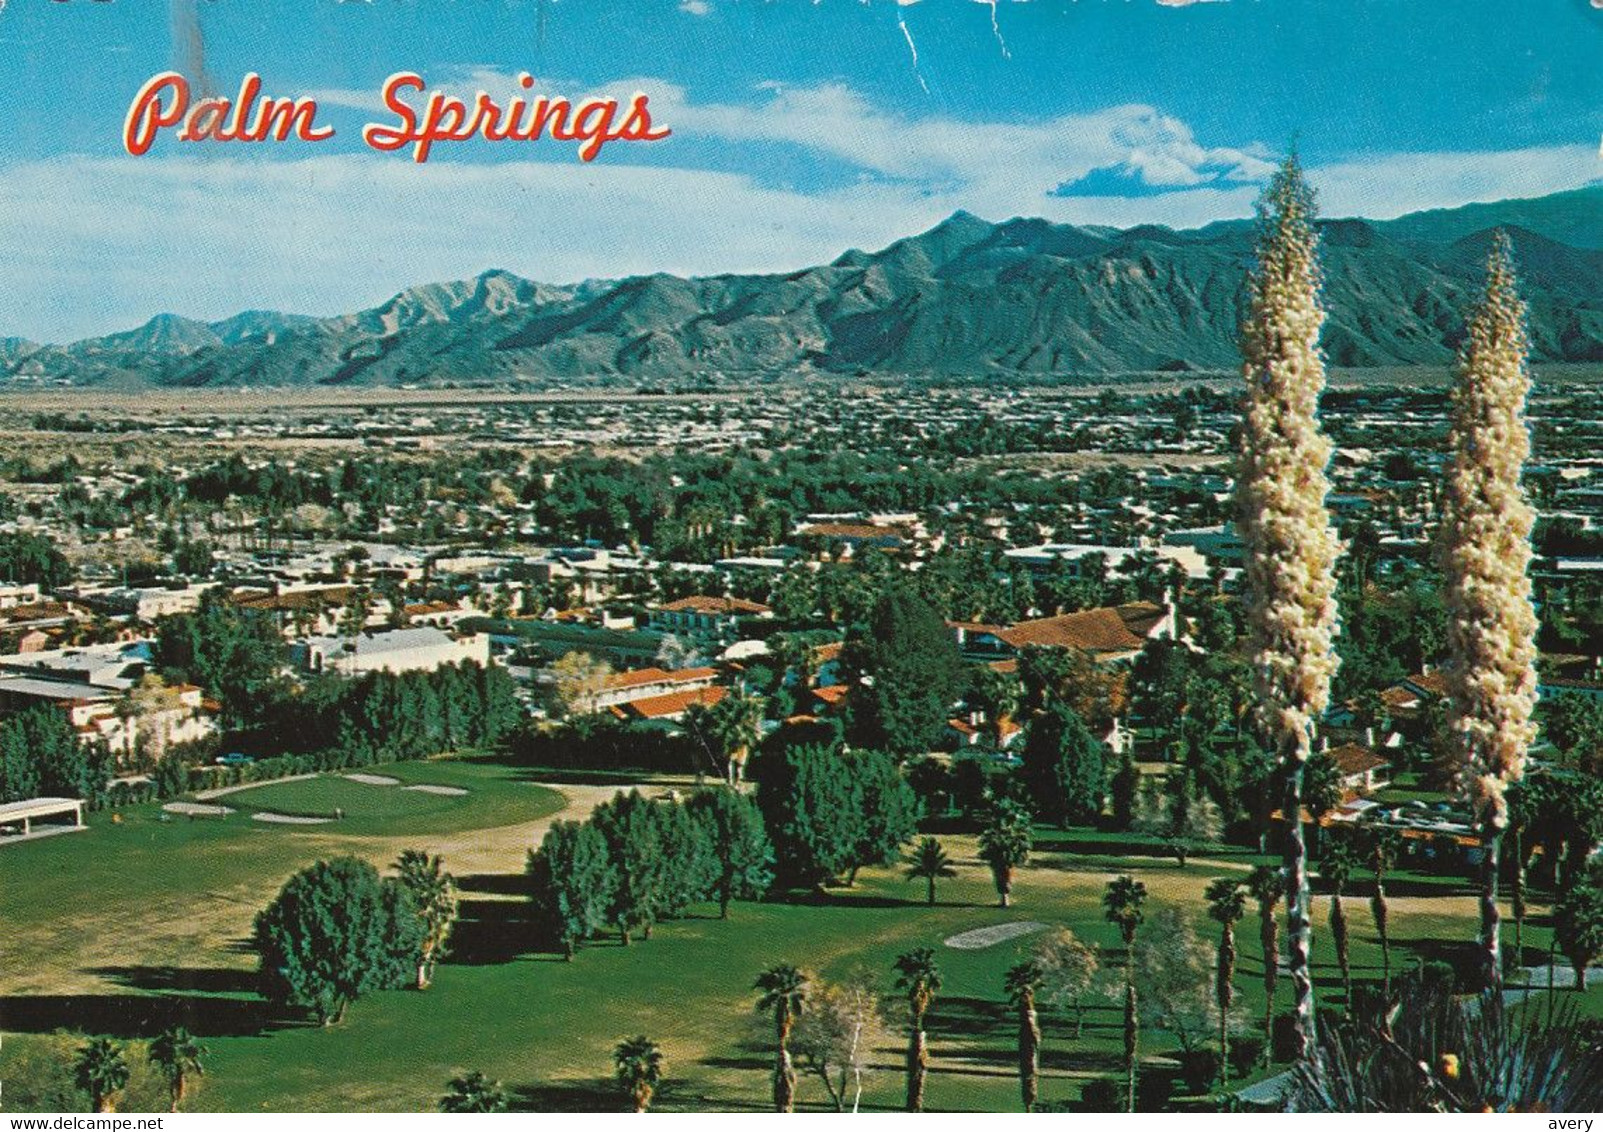 Palm Springs, California  A Picturesque Panorama - Palm Springs